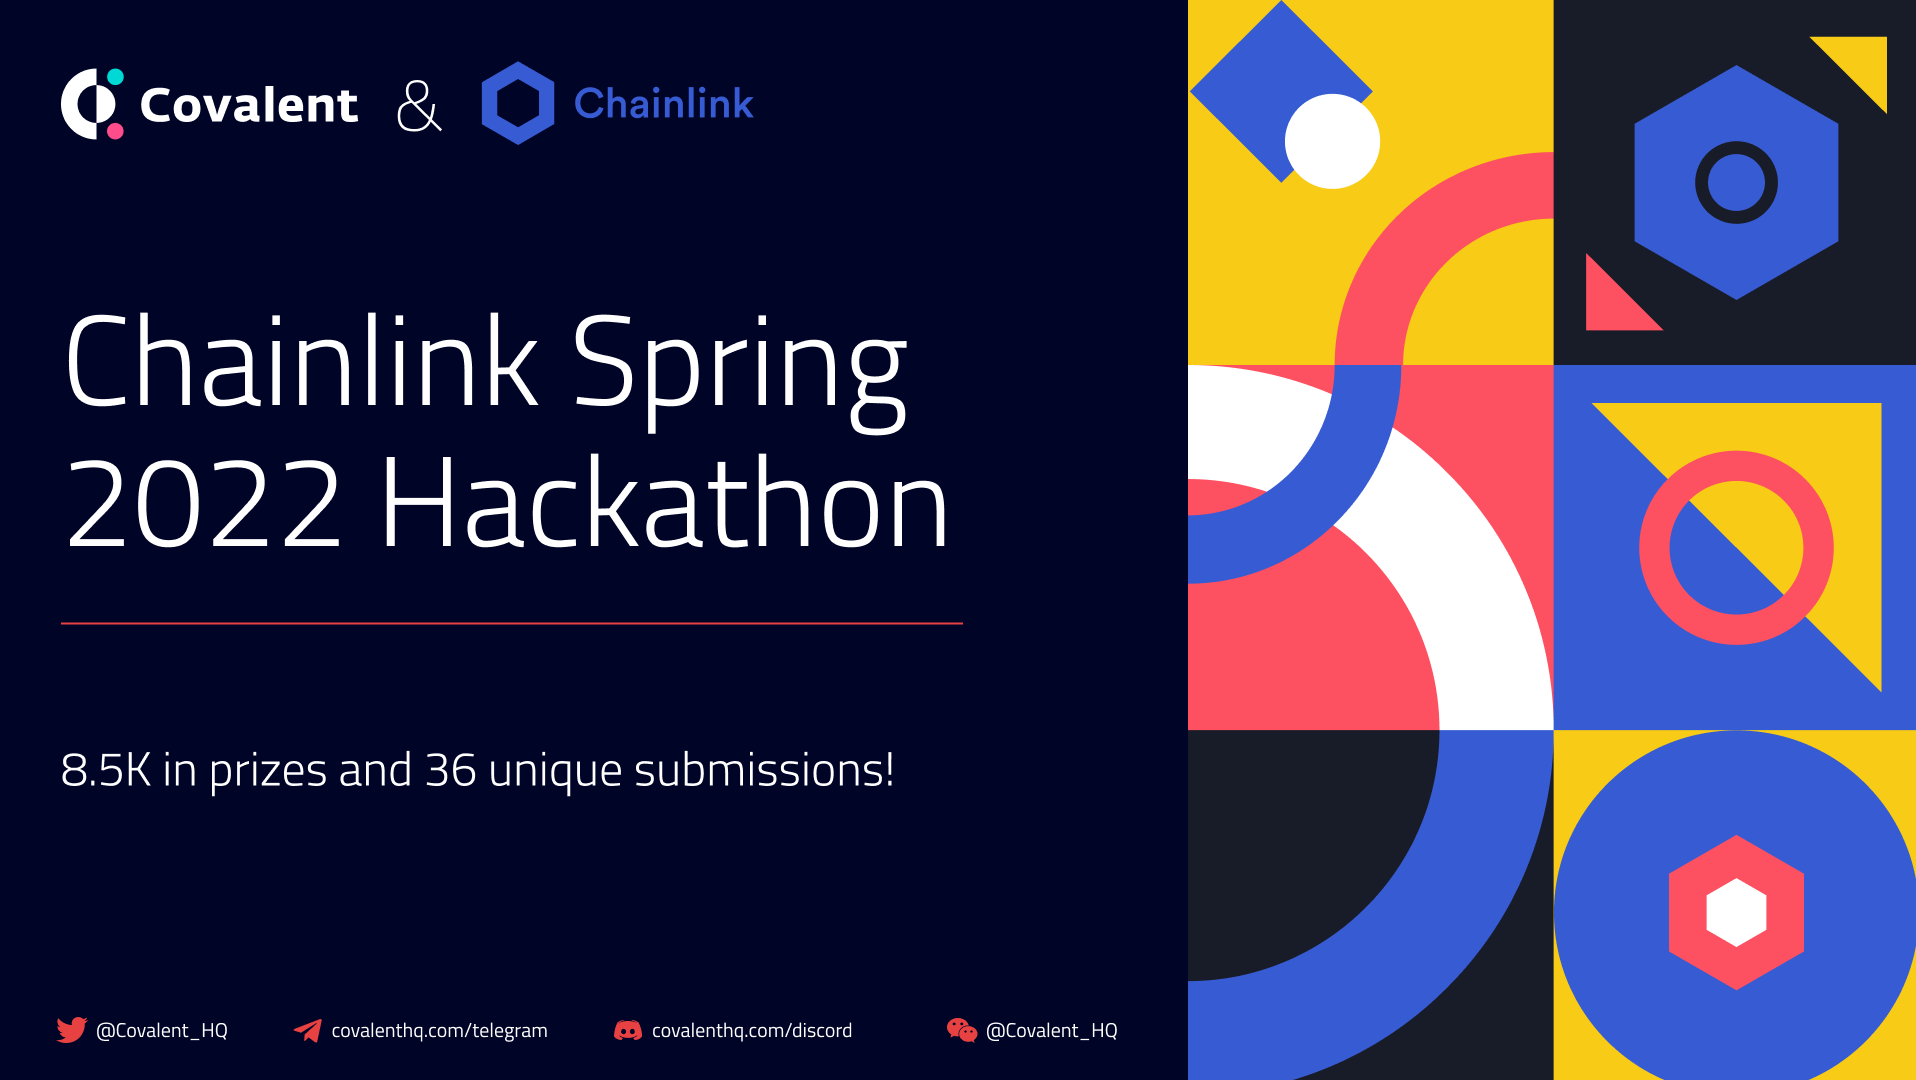 Chainlink Spring Hackathon - $8.5K in prizes and 36 unique submissions!